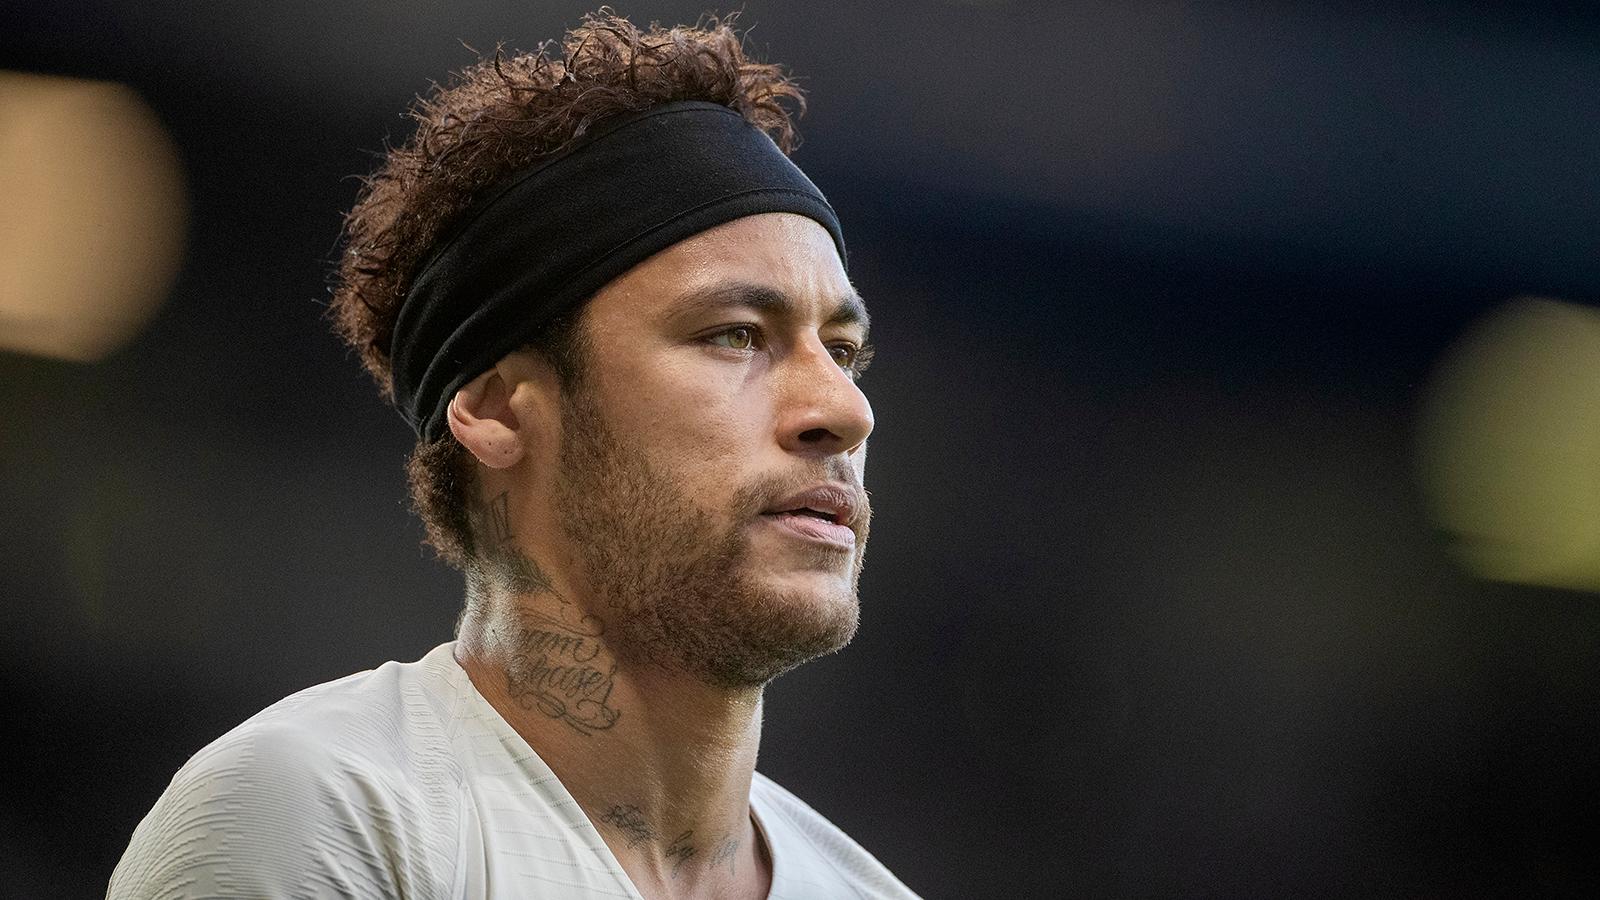 Neymar faces up to five years in prison for publishing sexual images